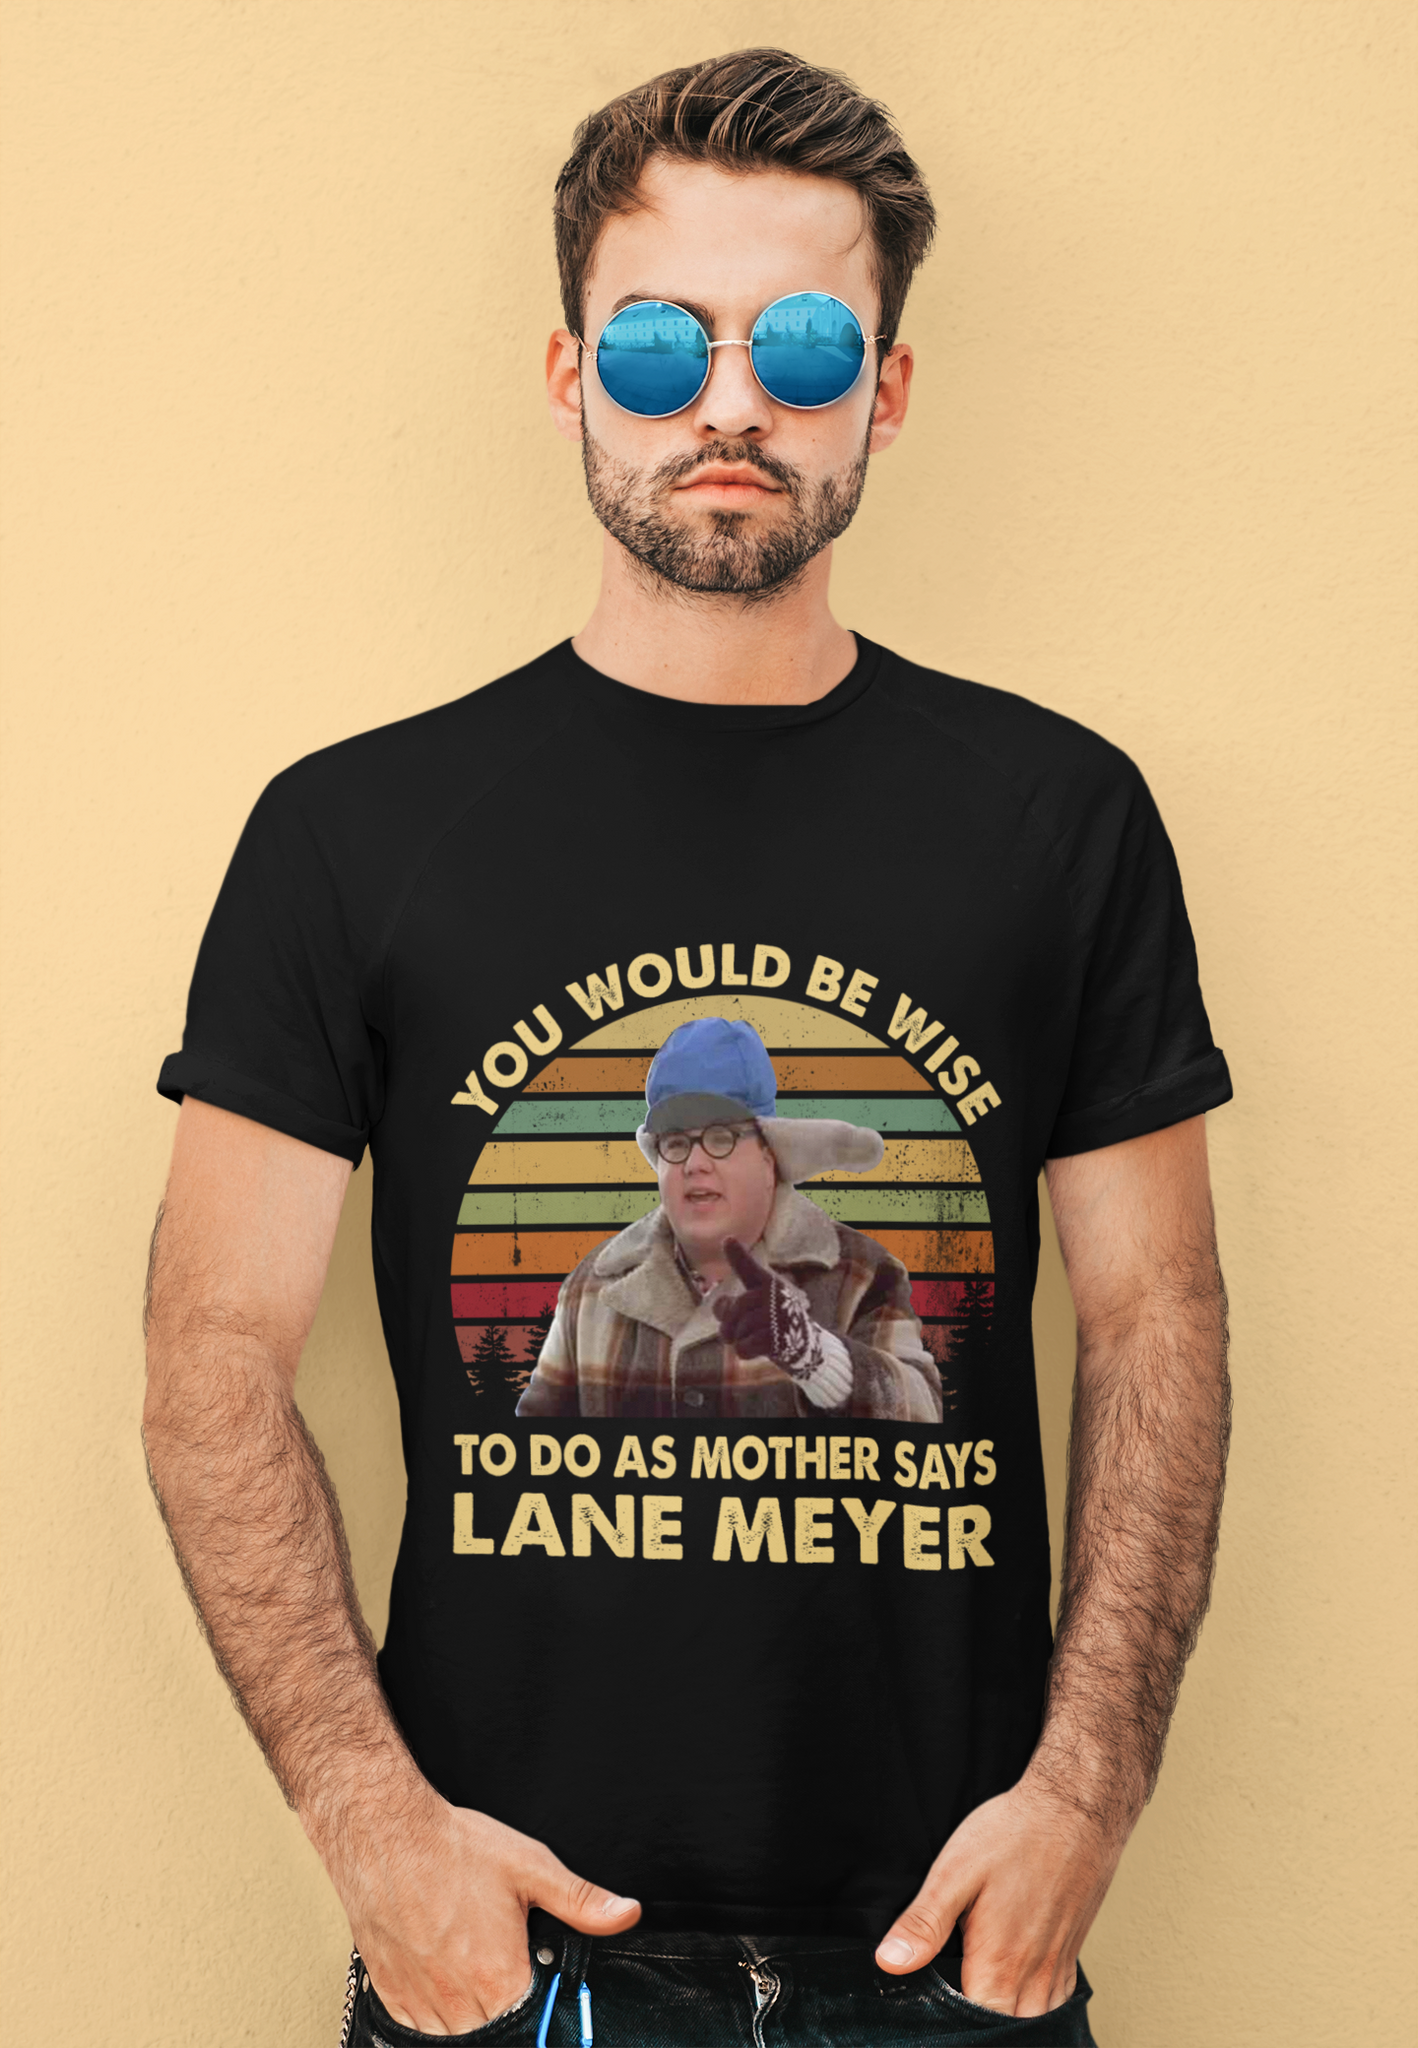 Better Off Dead Vintage T Shirt, Ricky Smith T Shirt, You Would Be Wise To Do As Mother Says Tshirt